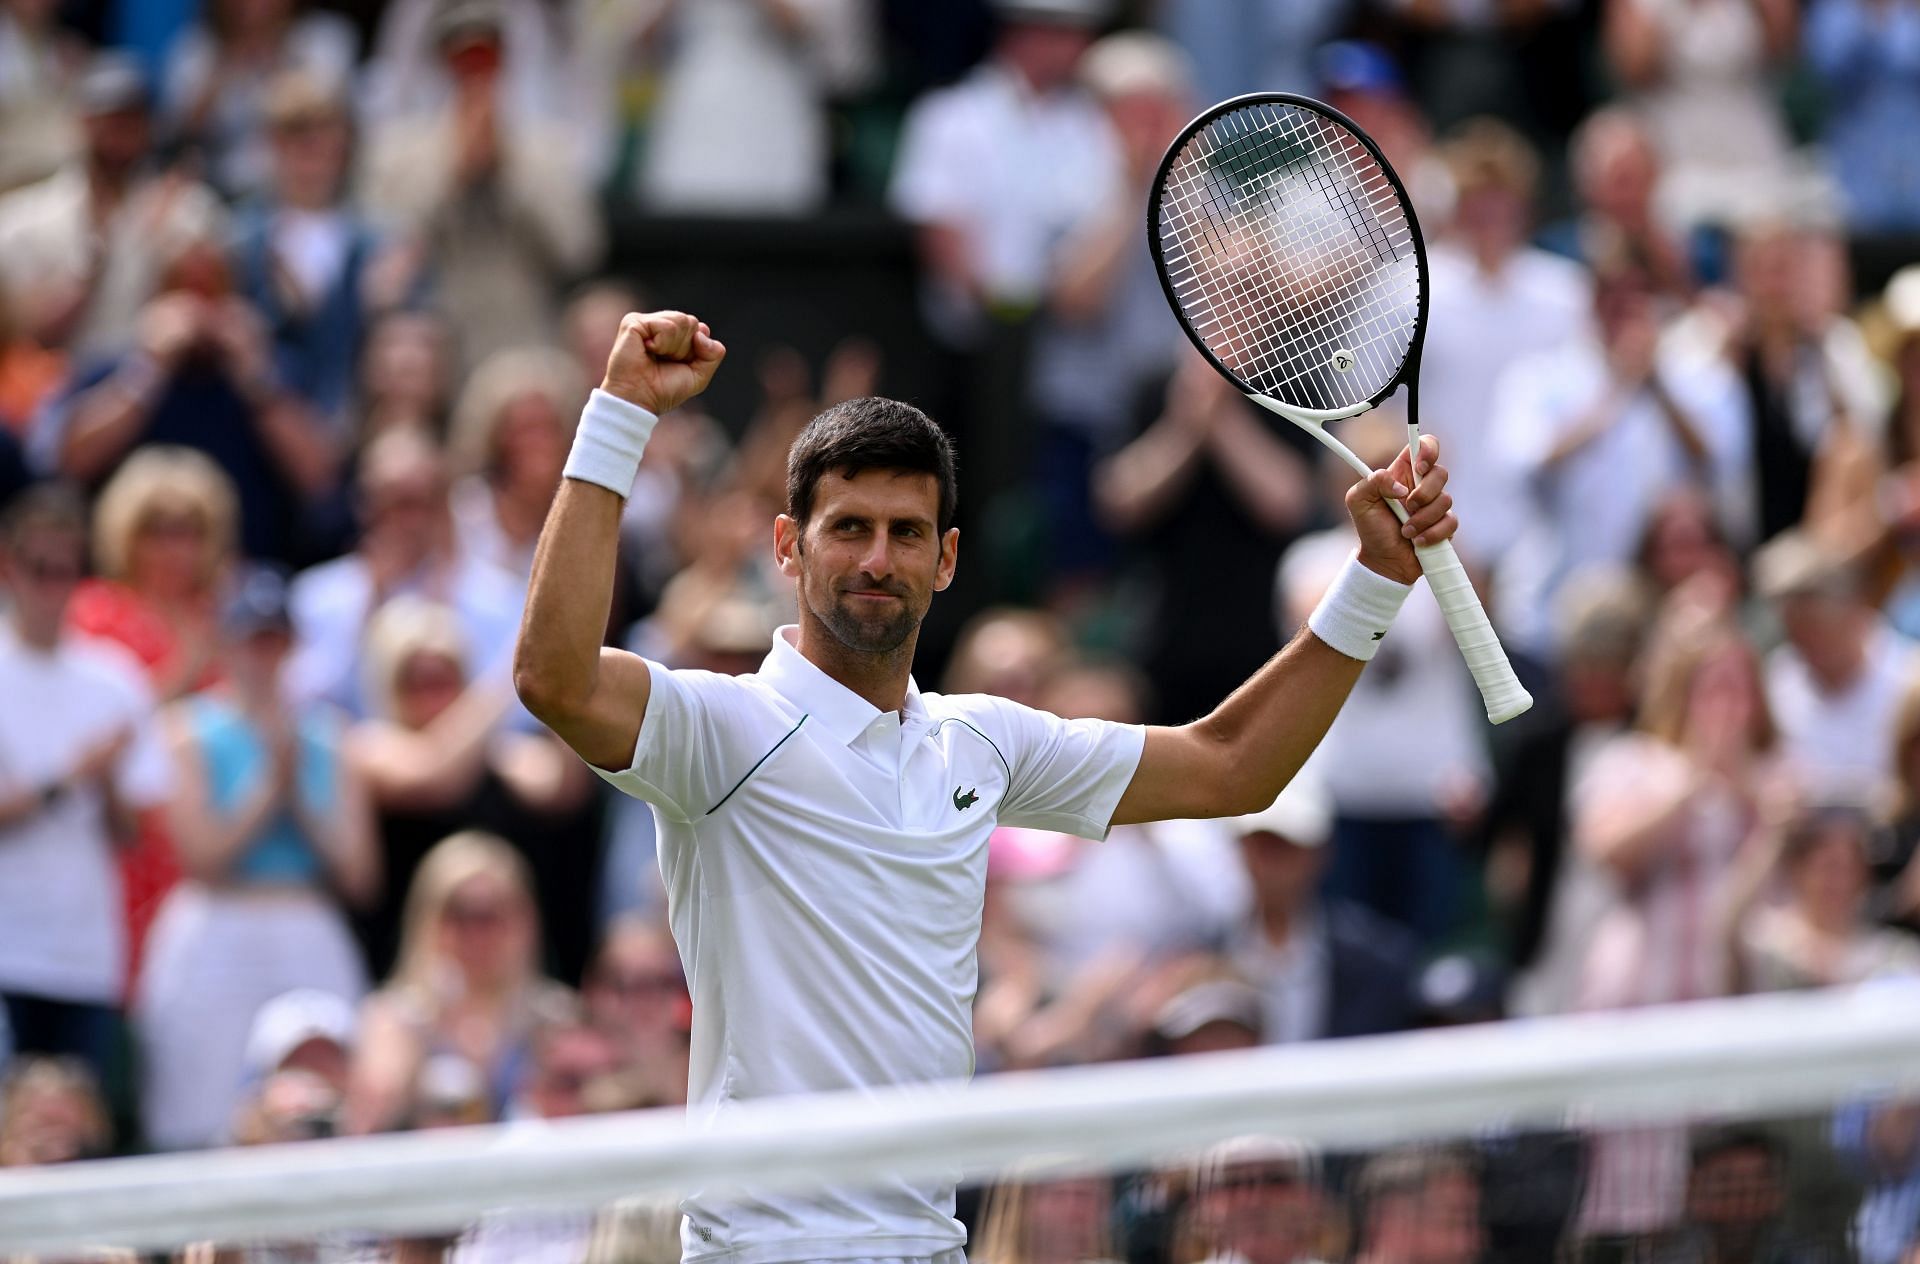 Novak Djokovic is in search of a seventh Wimbledon title this year